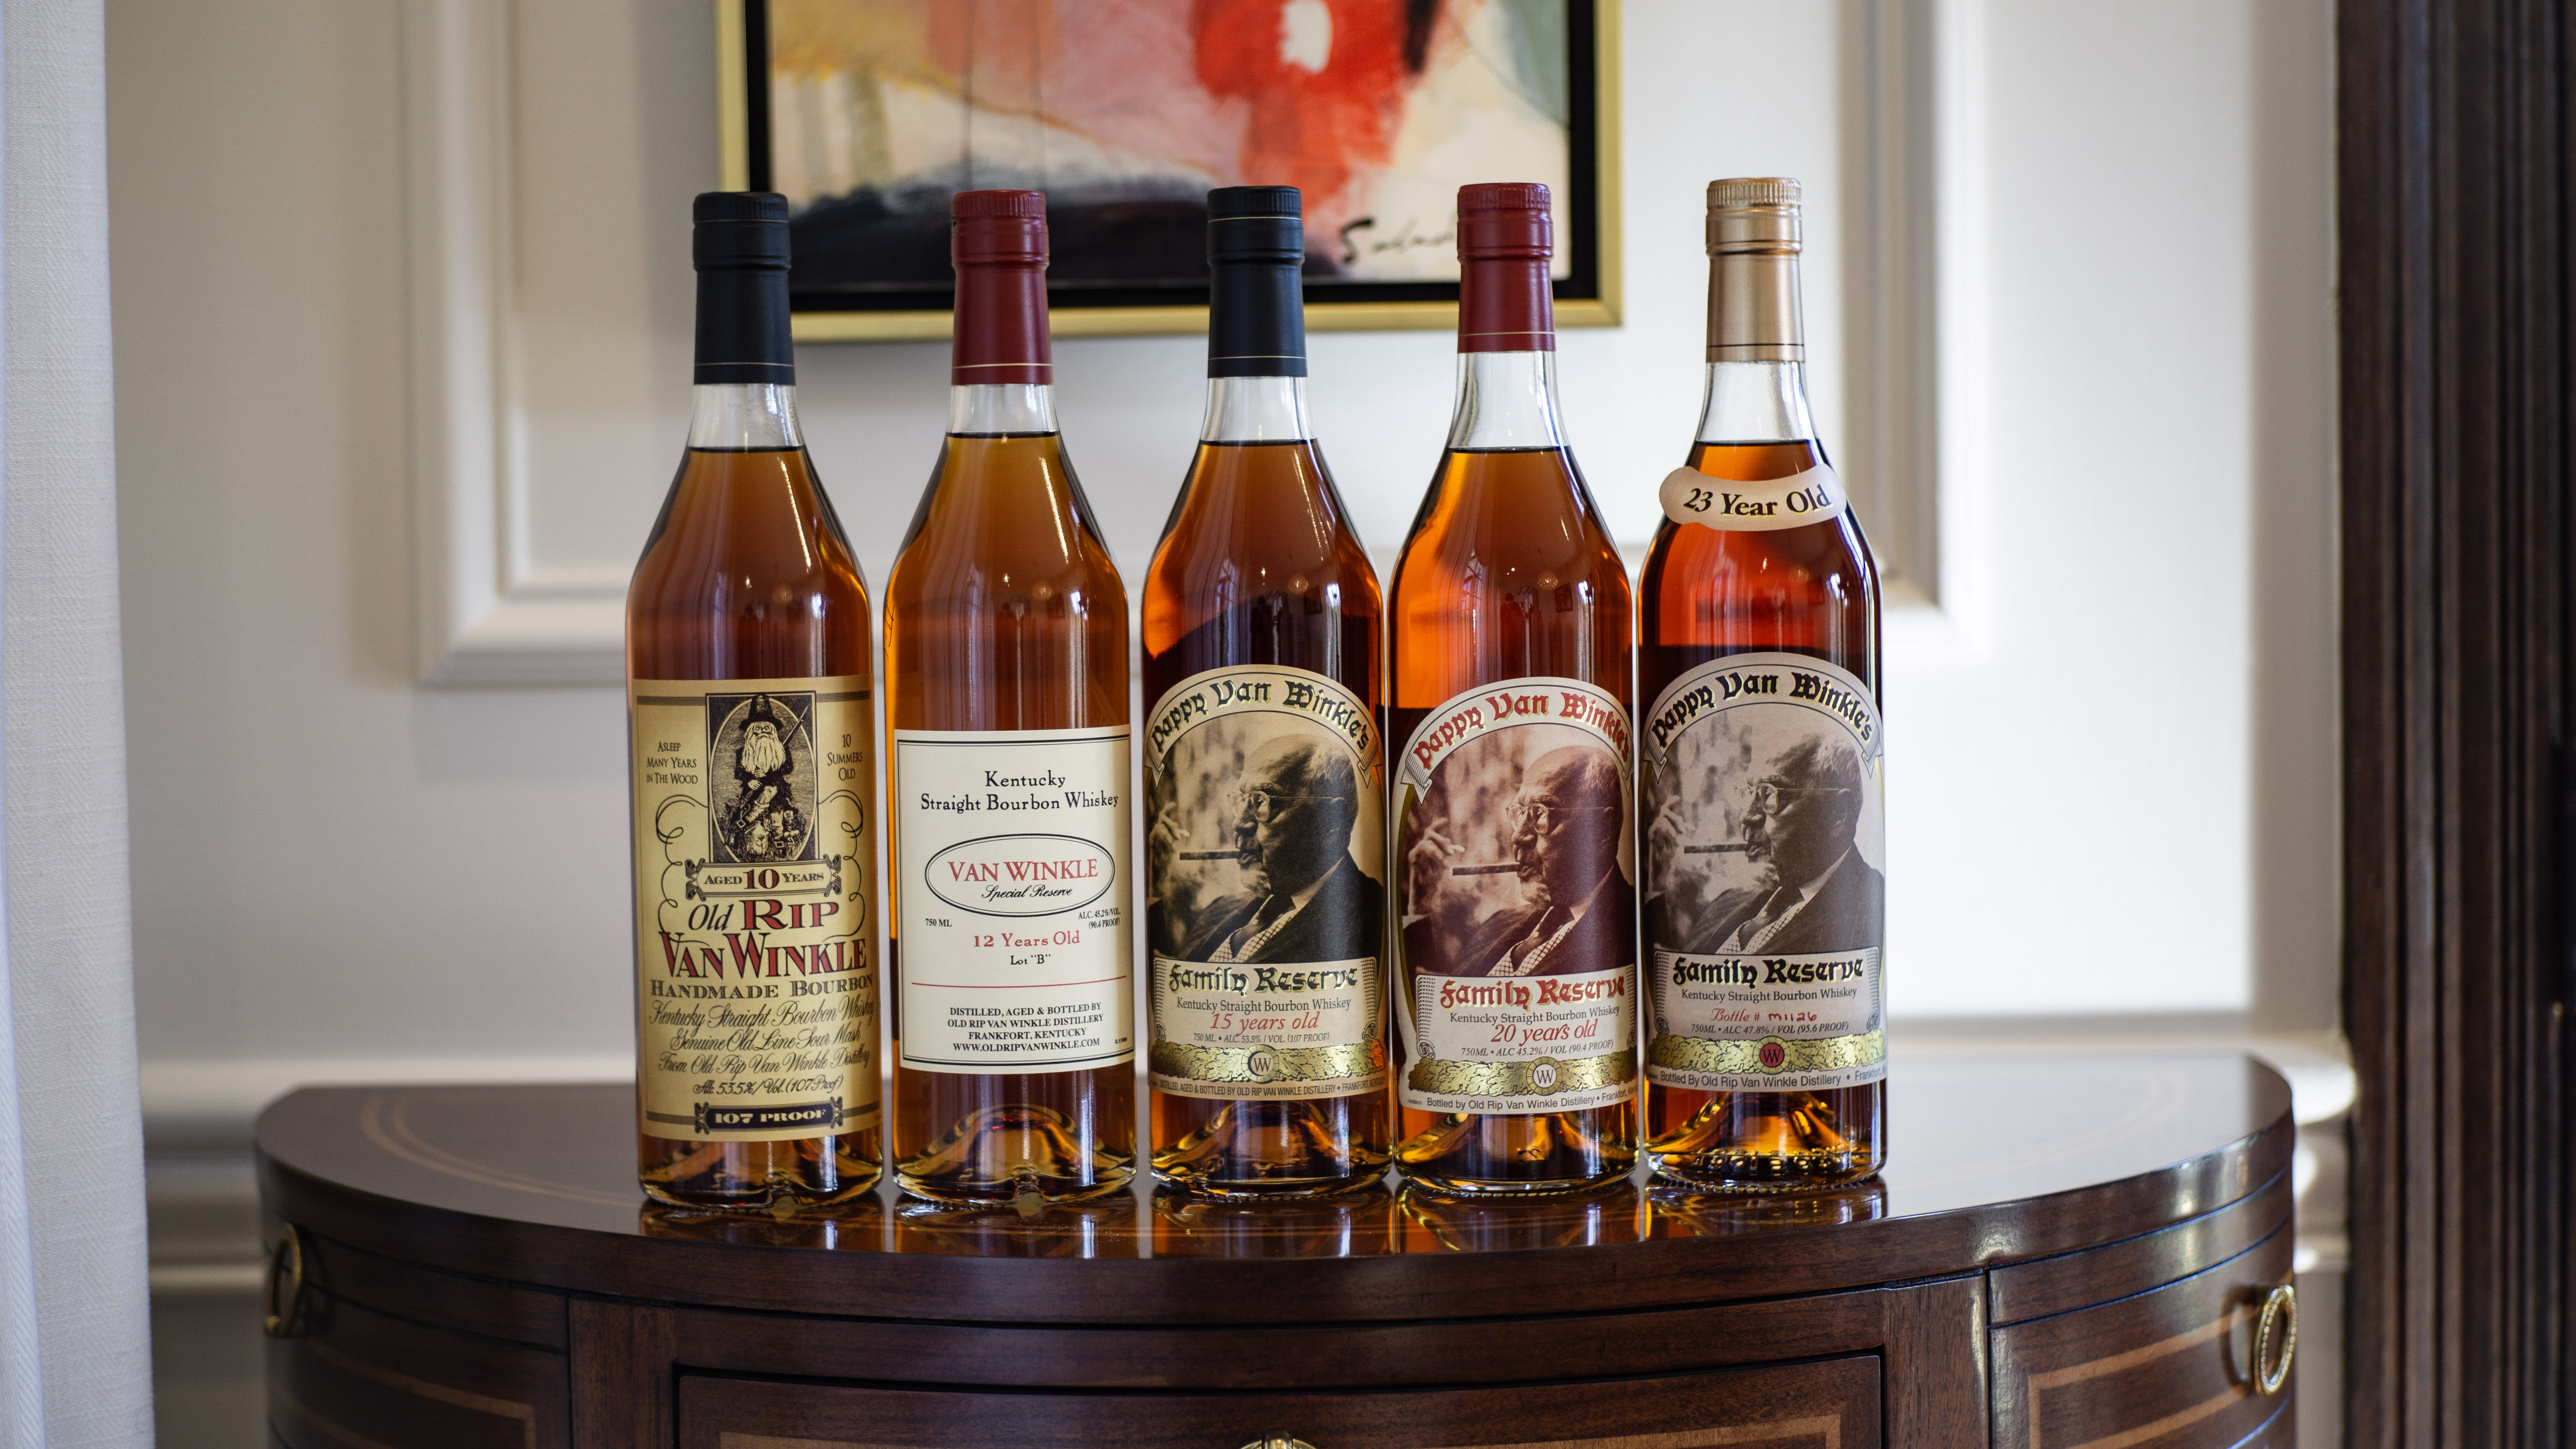 A Pappy vertical being raffle off as part of 22 separate lots